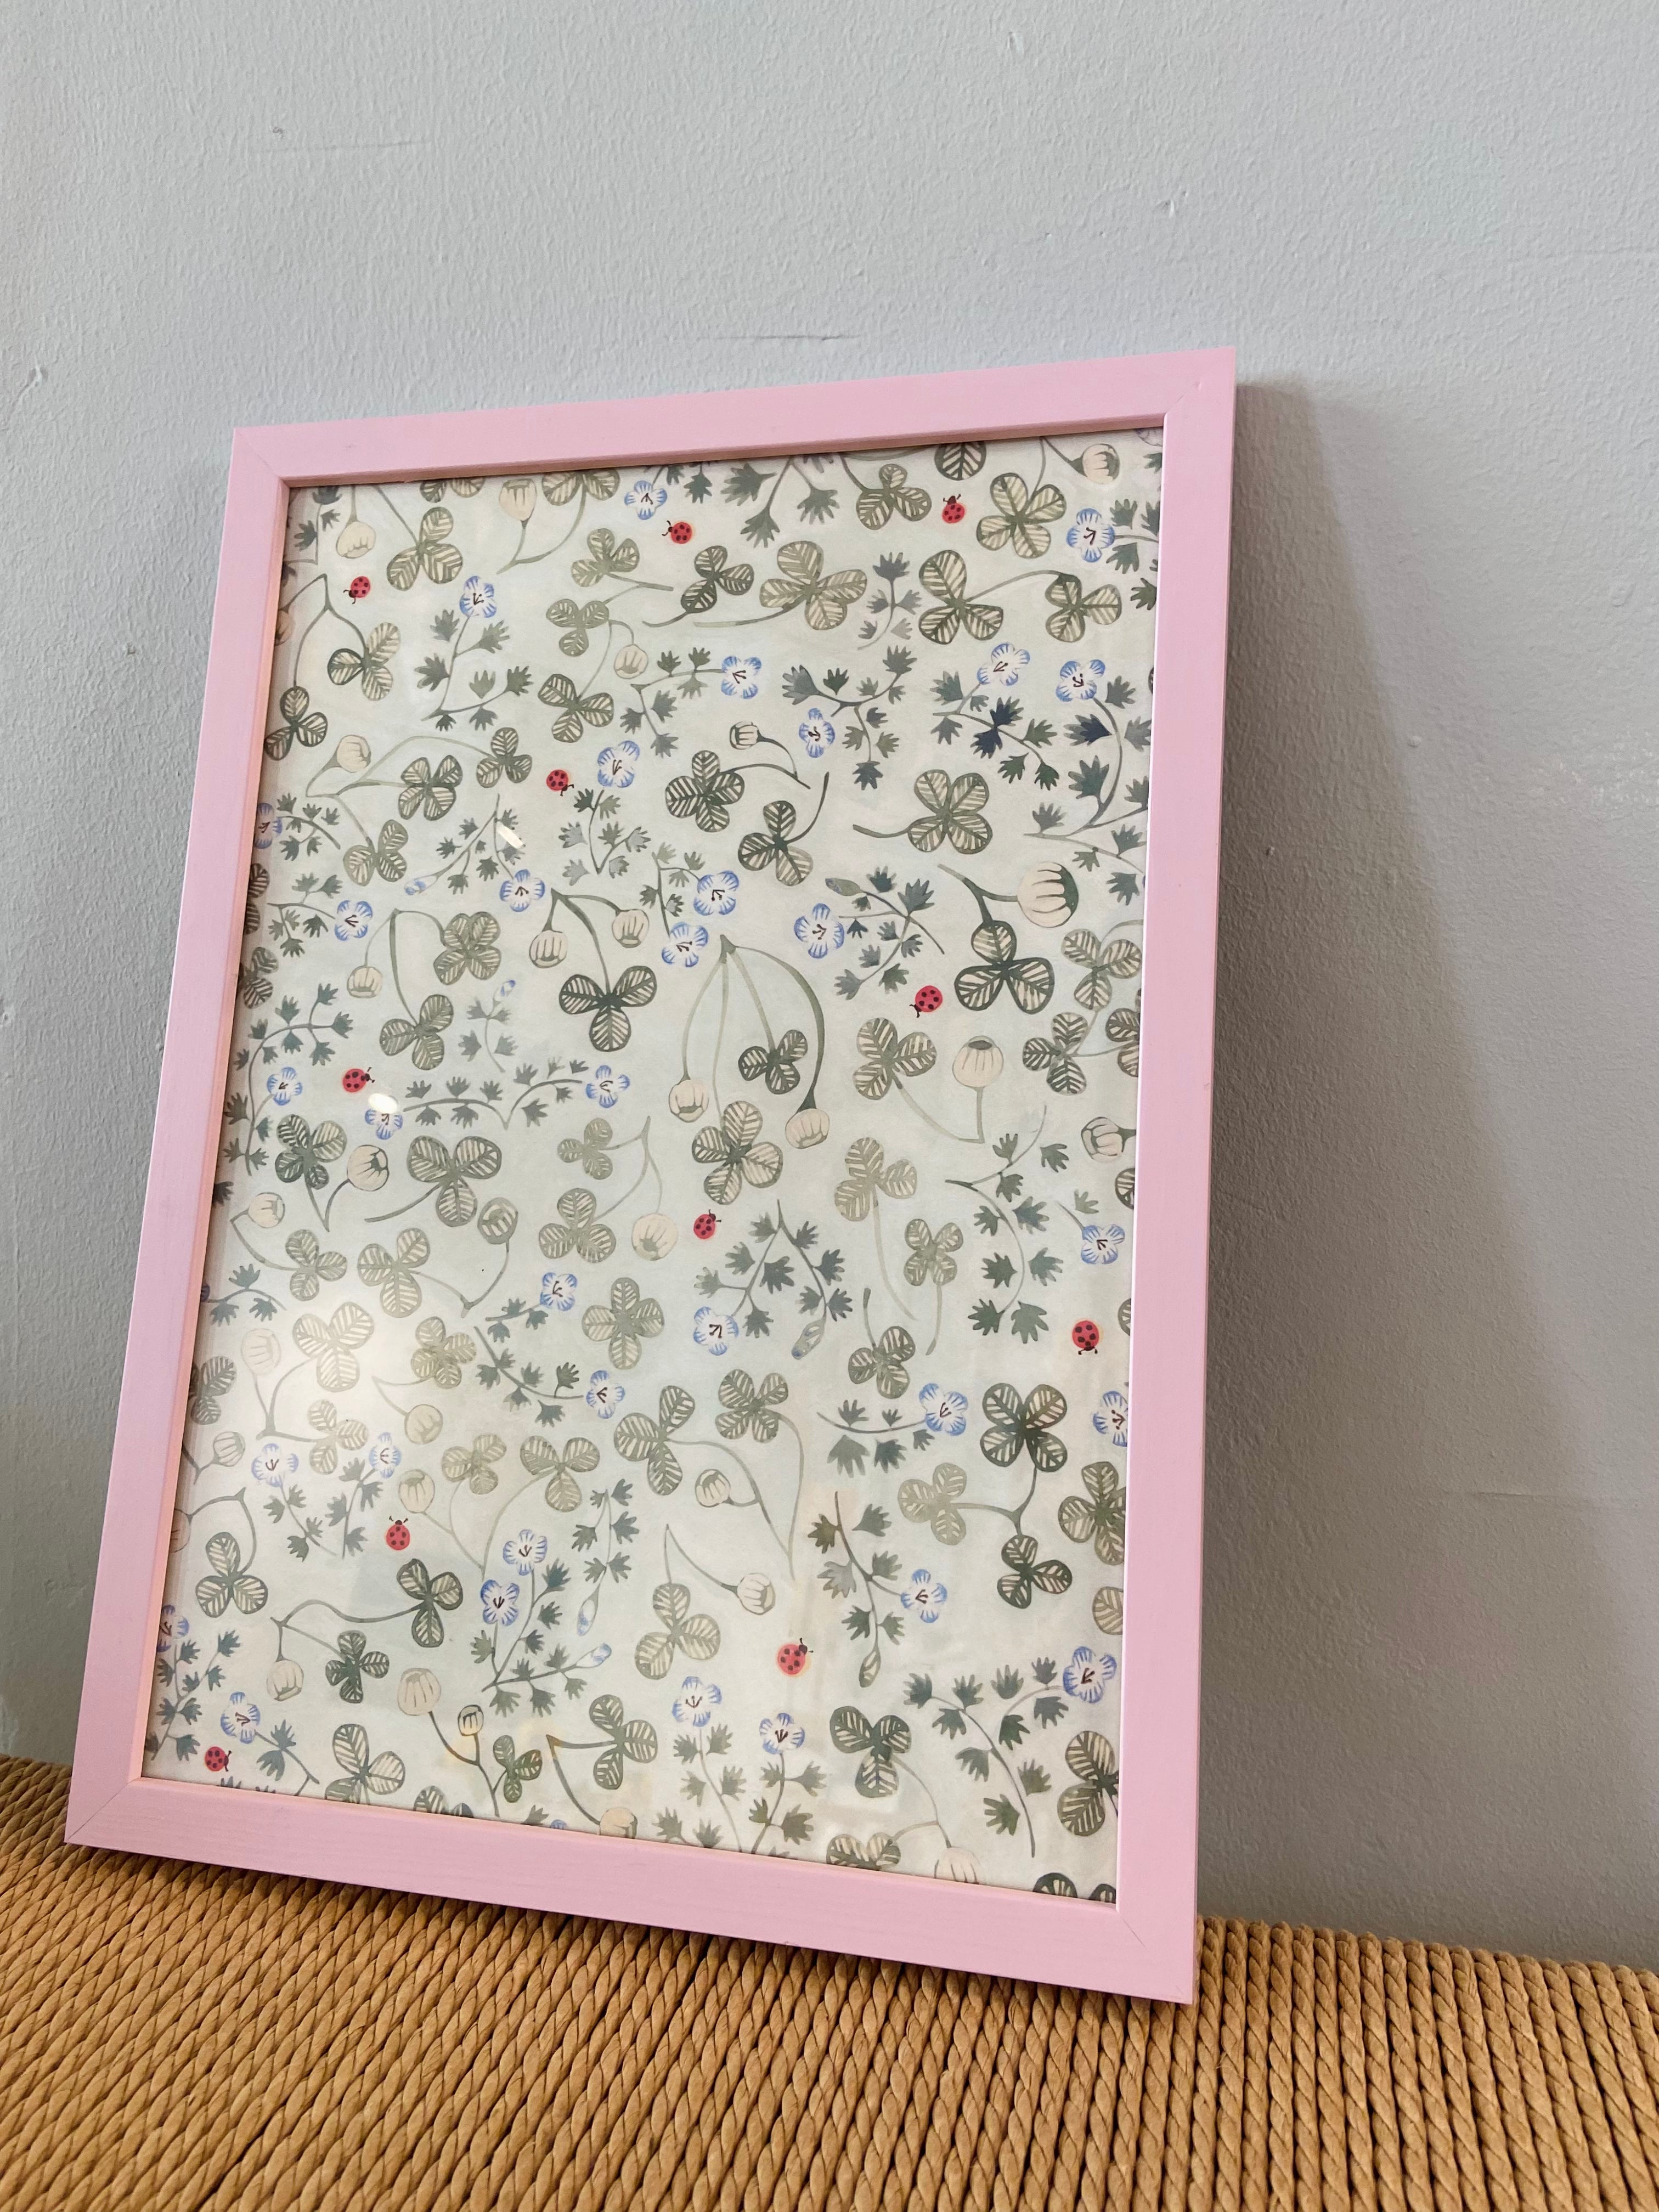 Clover with ladybirds in a pink frame